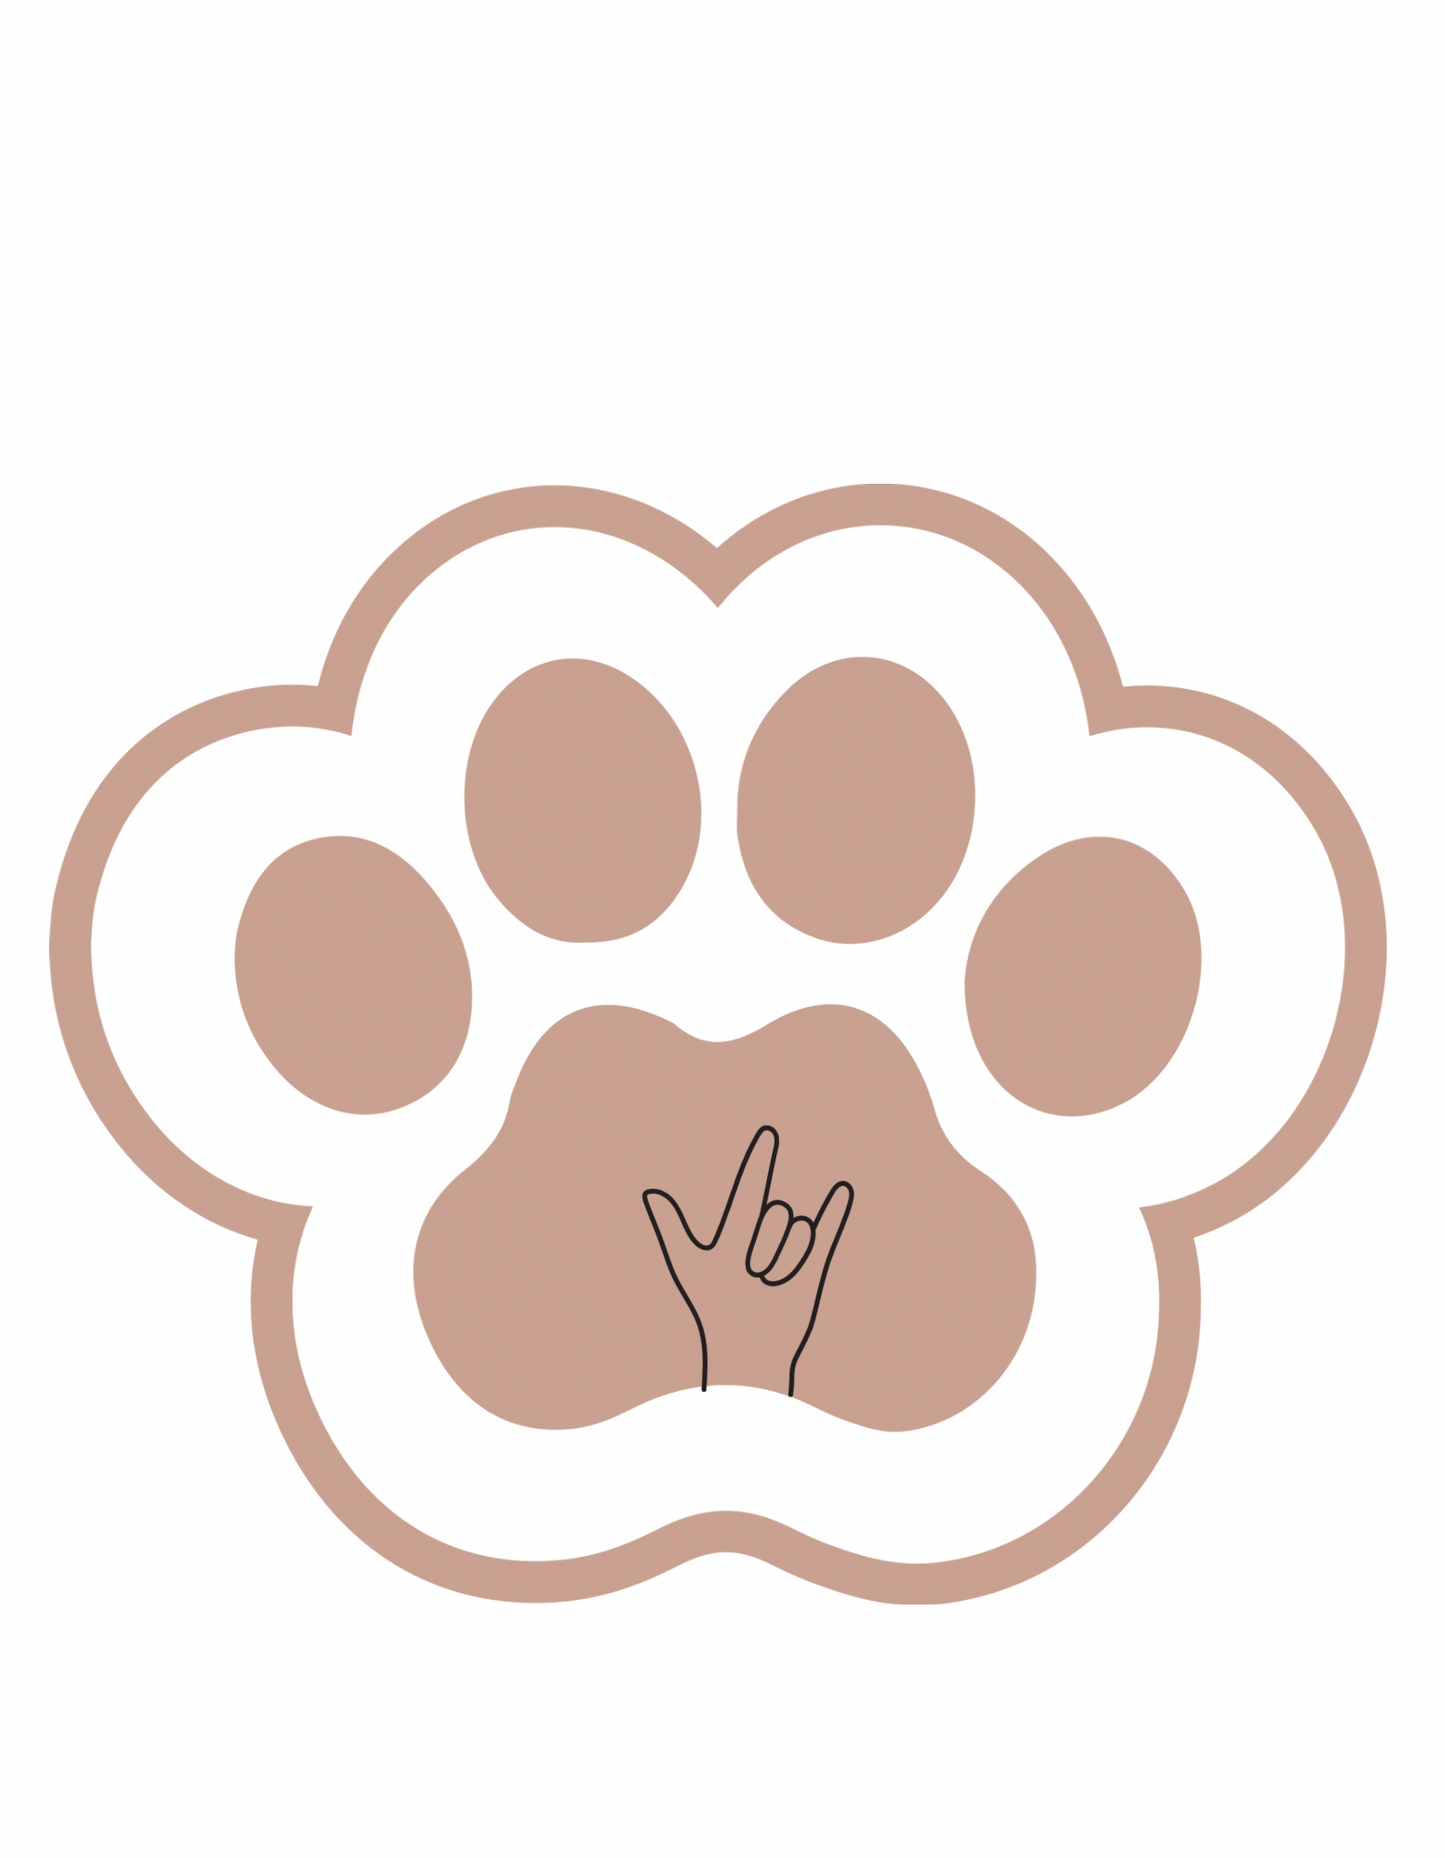 Tan Paw and ILY hand Sticker